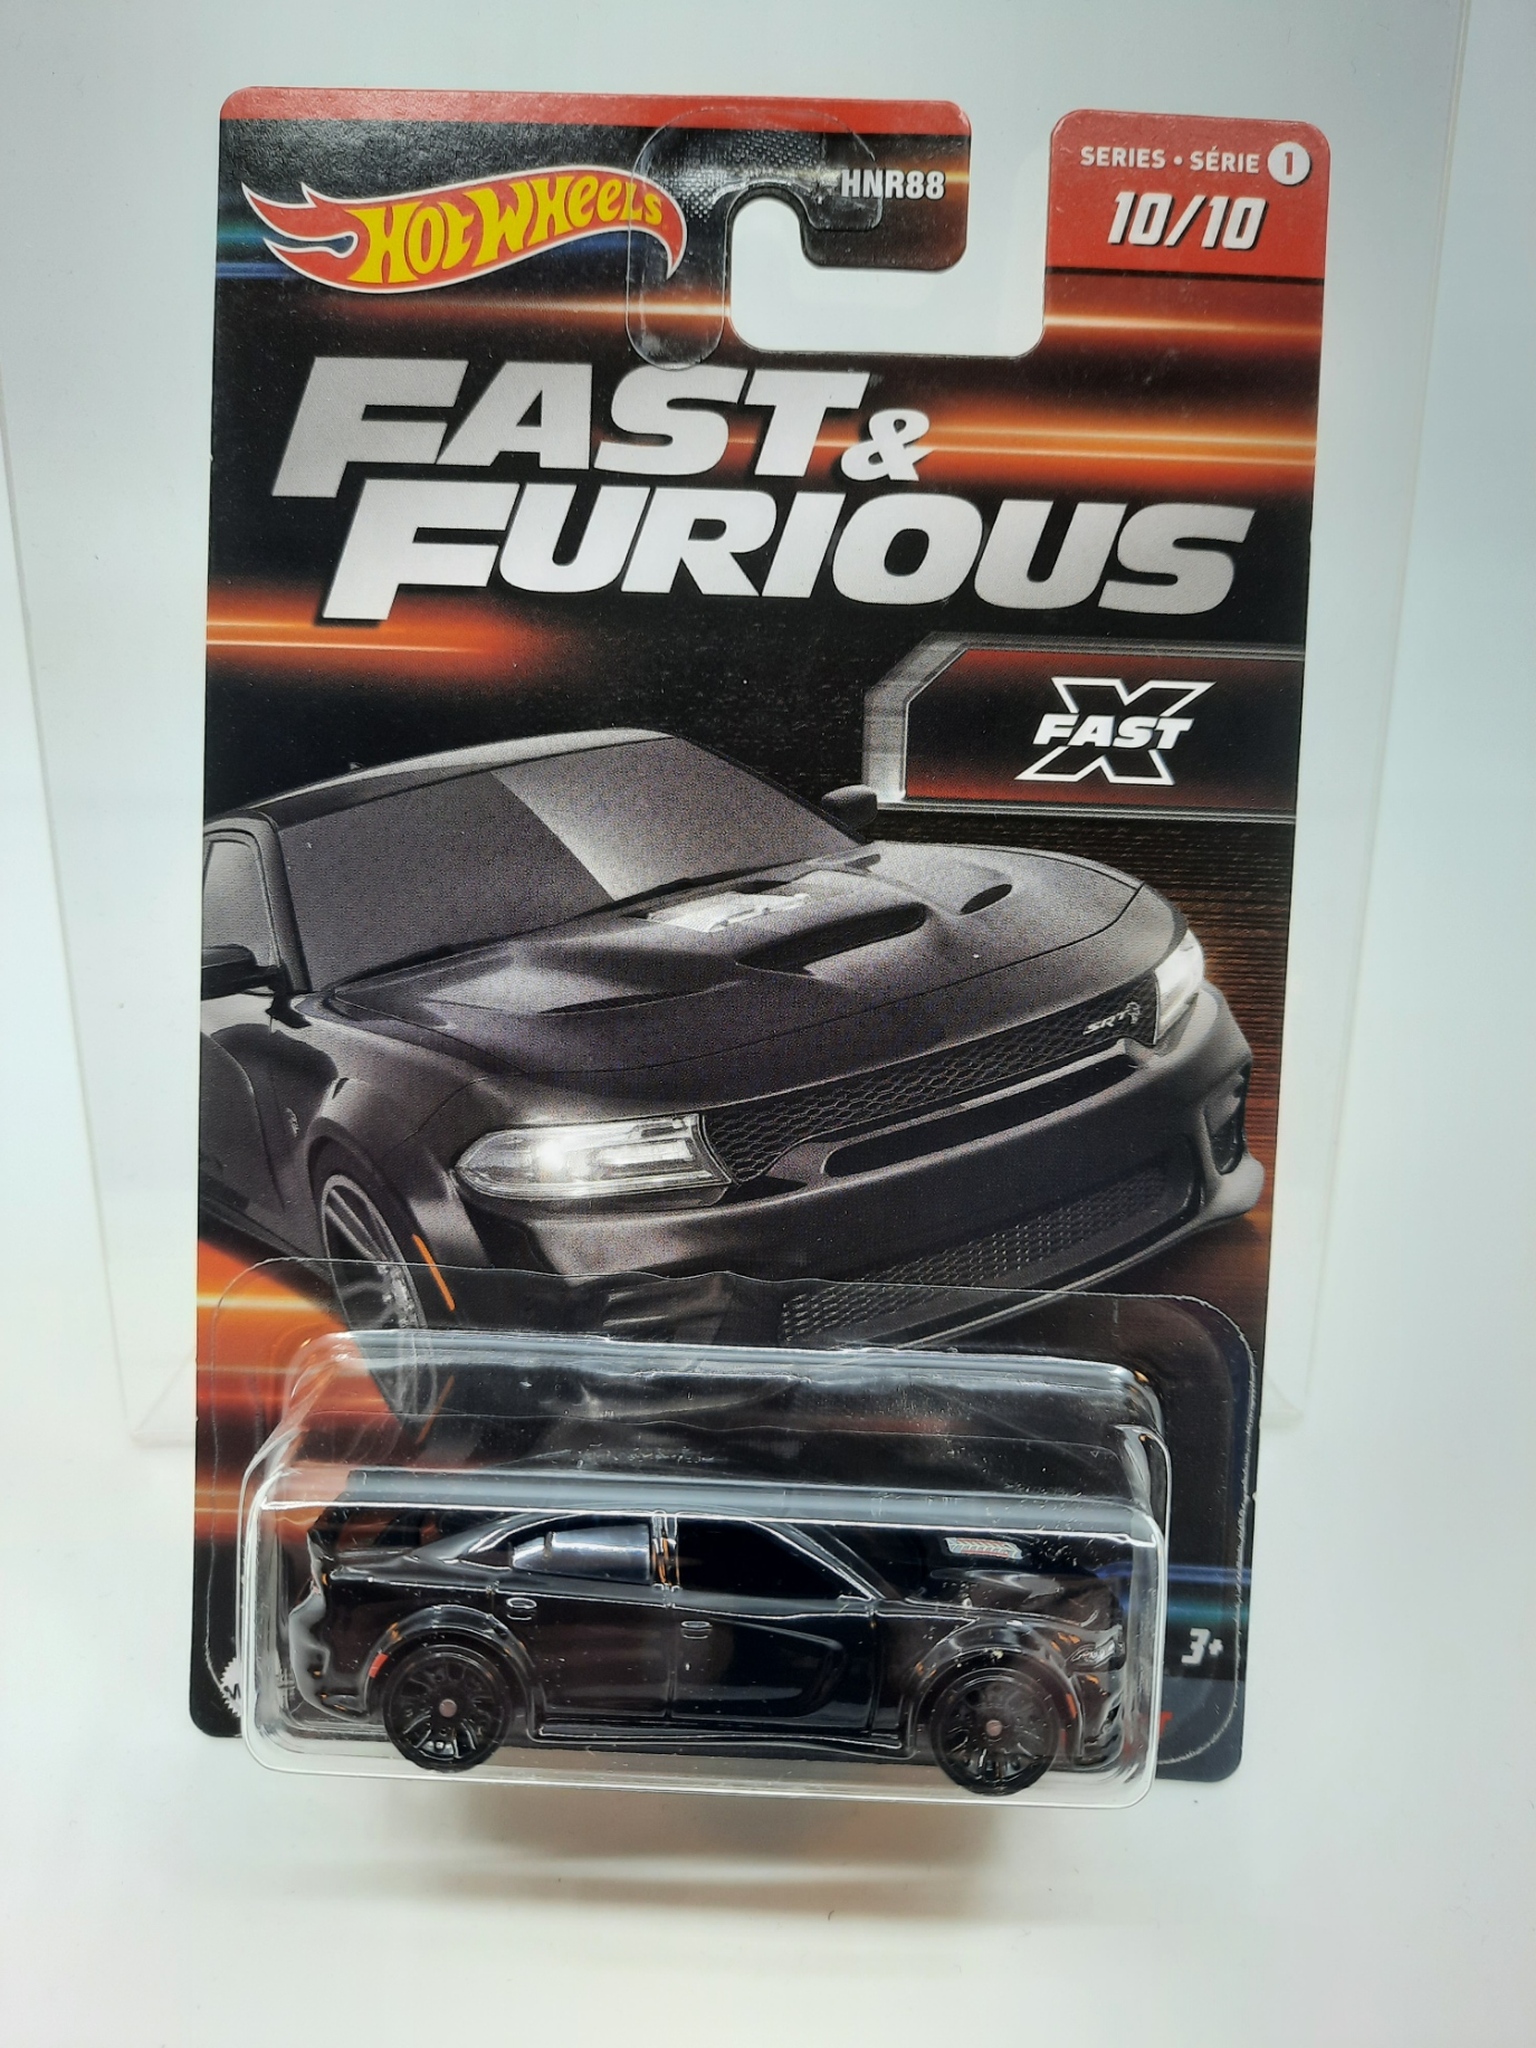 Fast & Furious #10/10 Dodge Charger Hellcat 2020